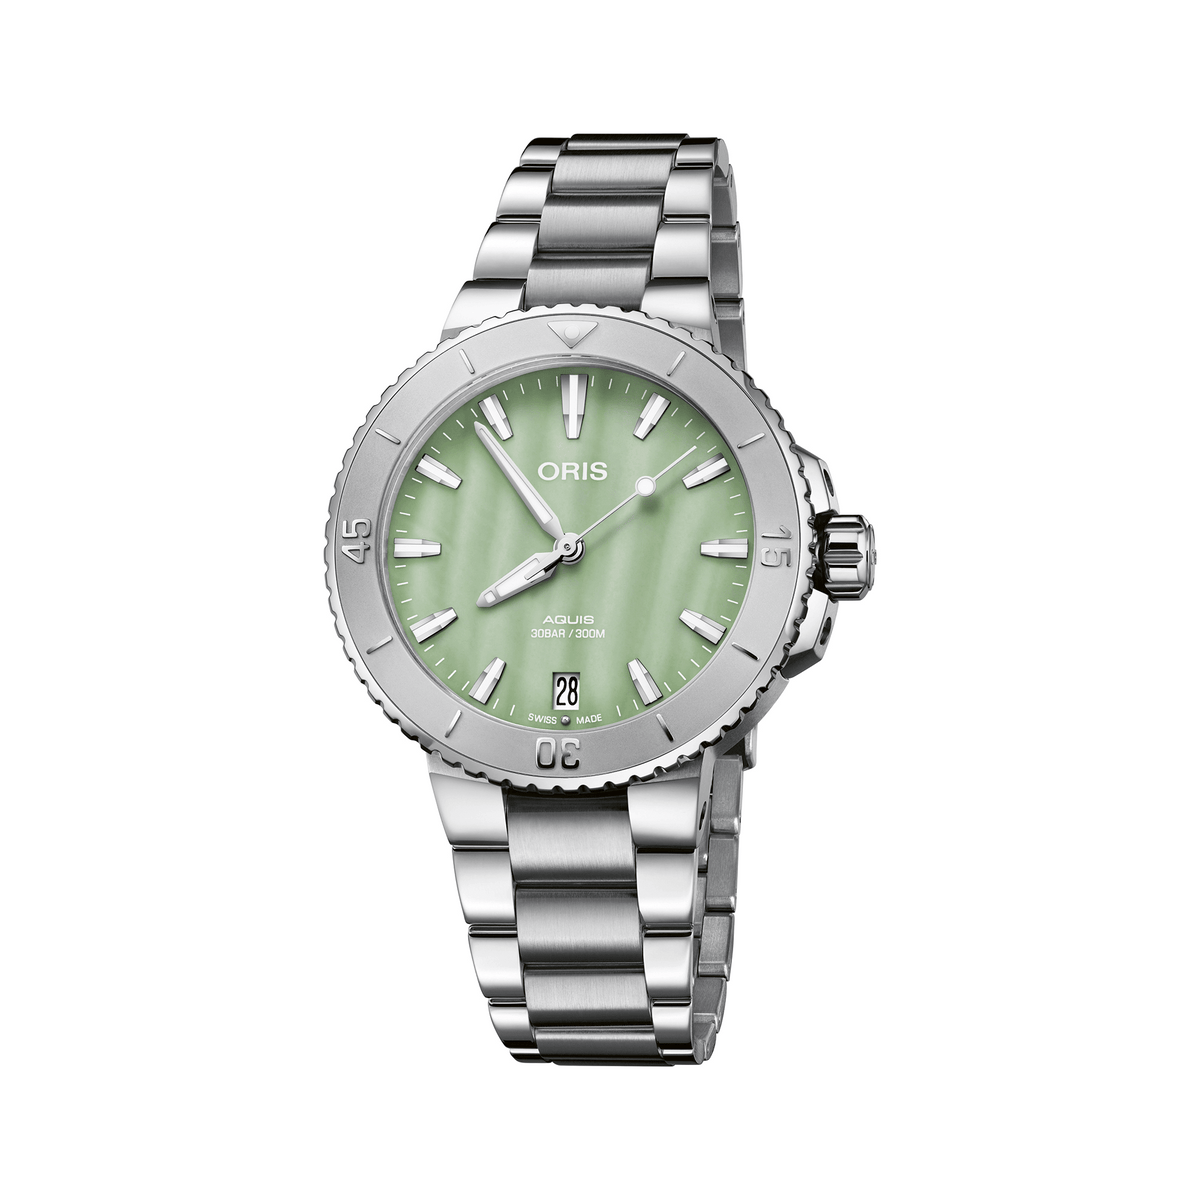 Oris Aquis Women's 36.5mm Stainless Steel Automatic Watch 733 7770 4157MB - Wallace Bishop